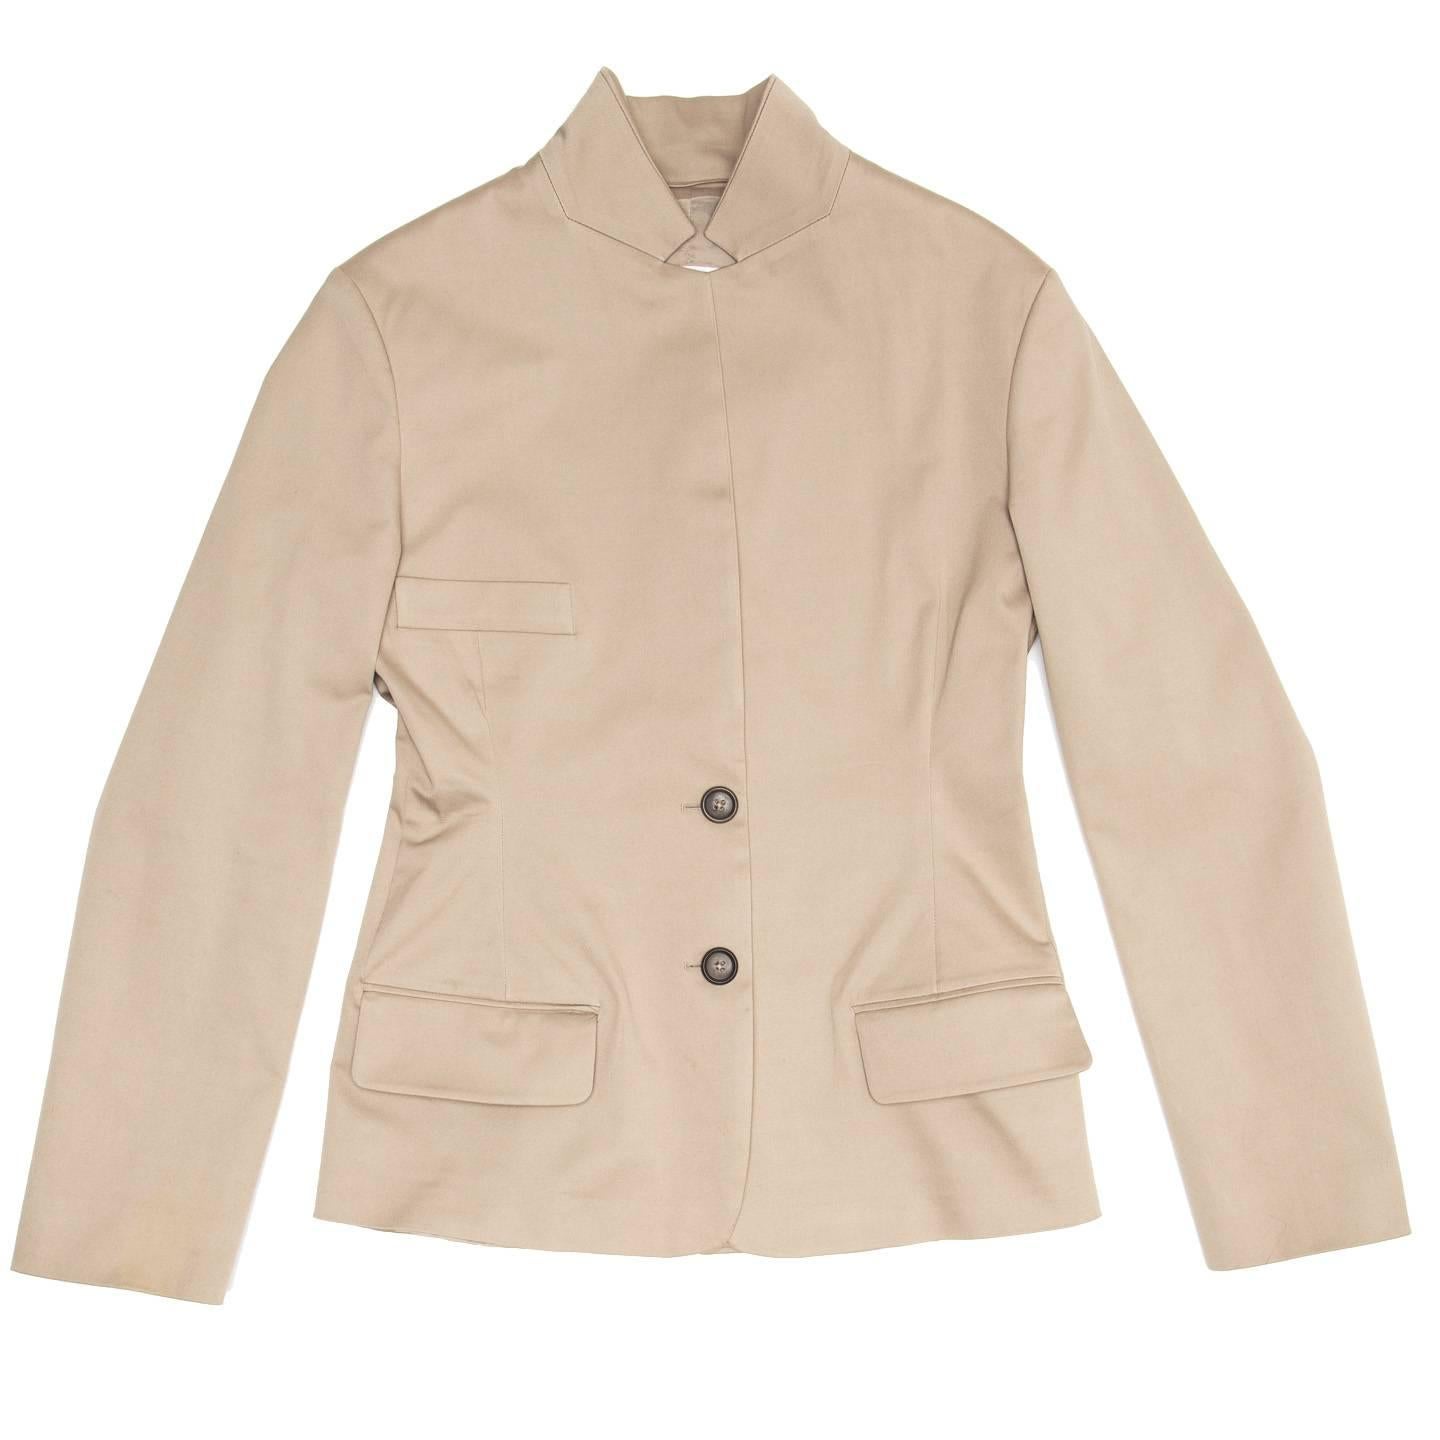 Taupe single breasted cotton jacket that fastens with 2 dark buttons at waist leaving a long lapel. The shape is fitted, the front enriched by a classic breast pockets and two flap pockets at hips, while the back has a long shapes vent that starts